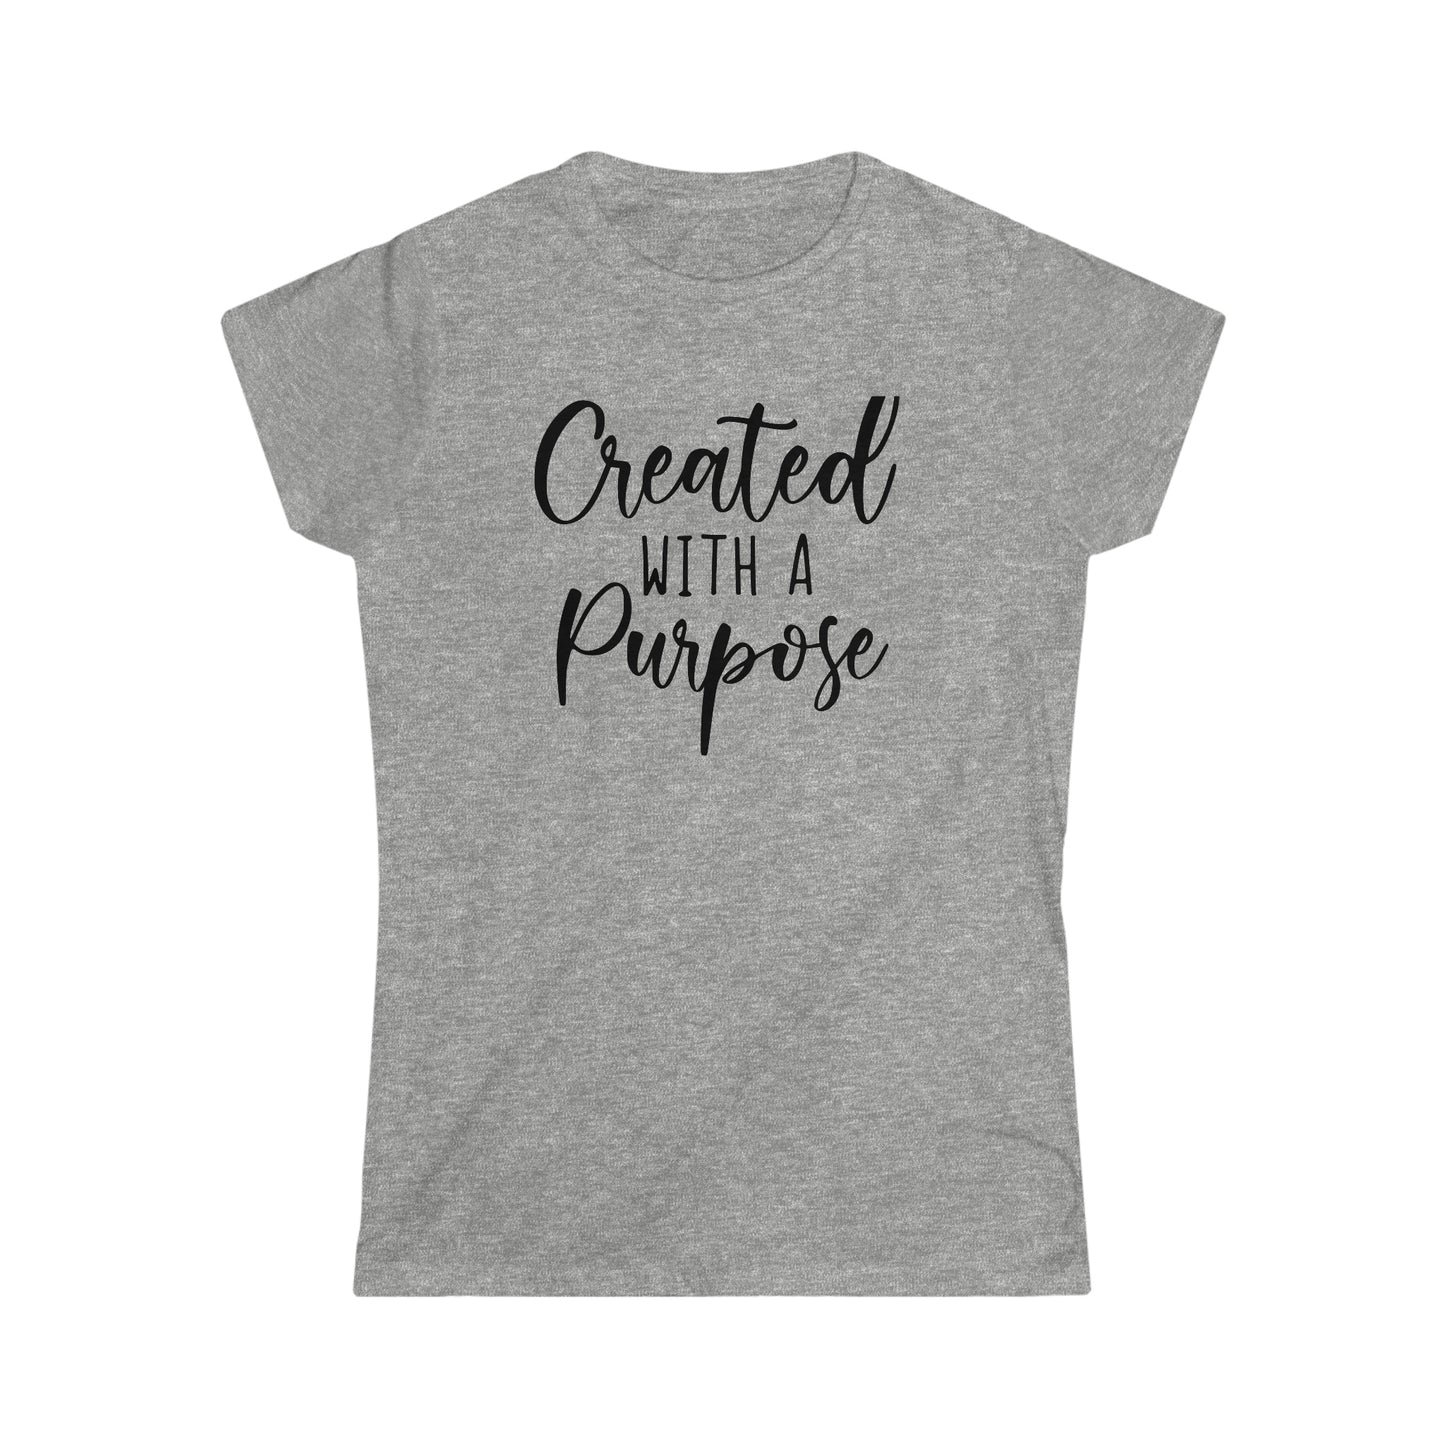 Christian Apparel (Created With a Purpose)